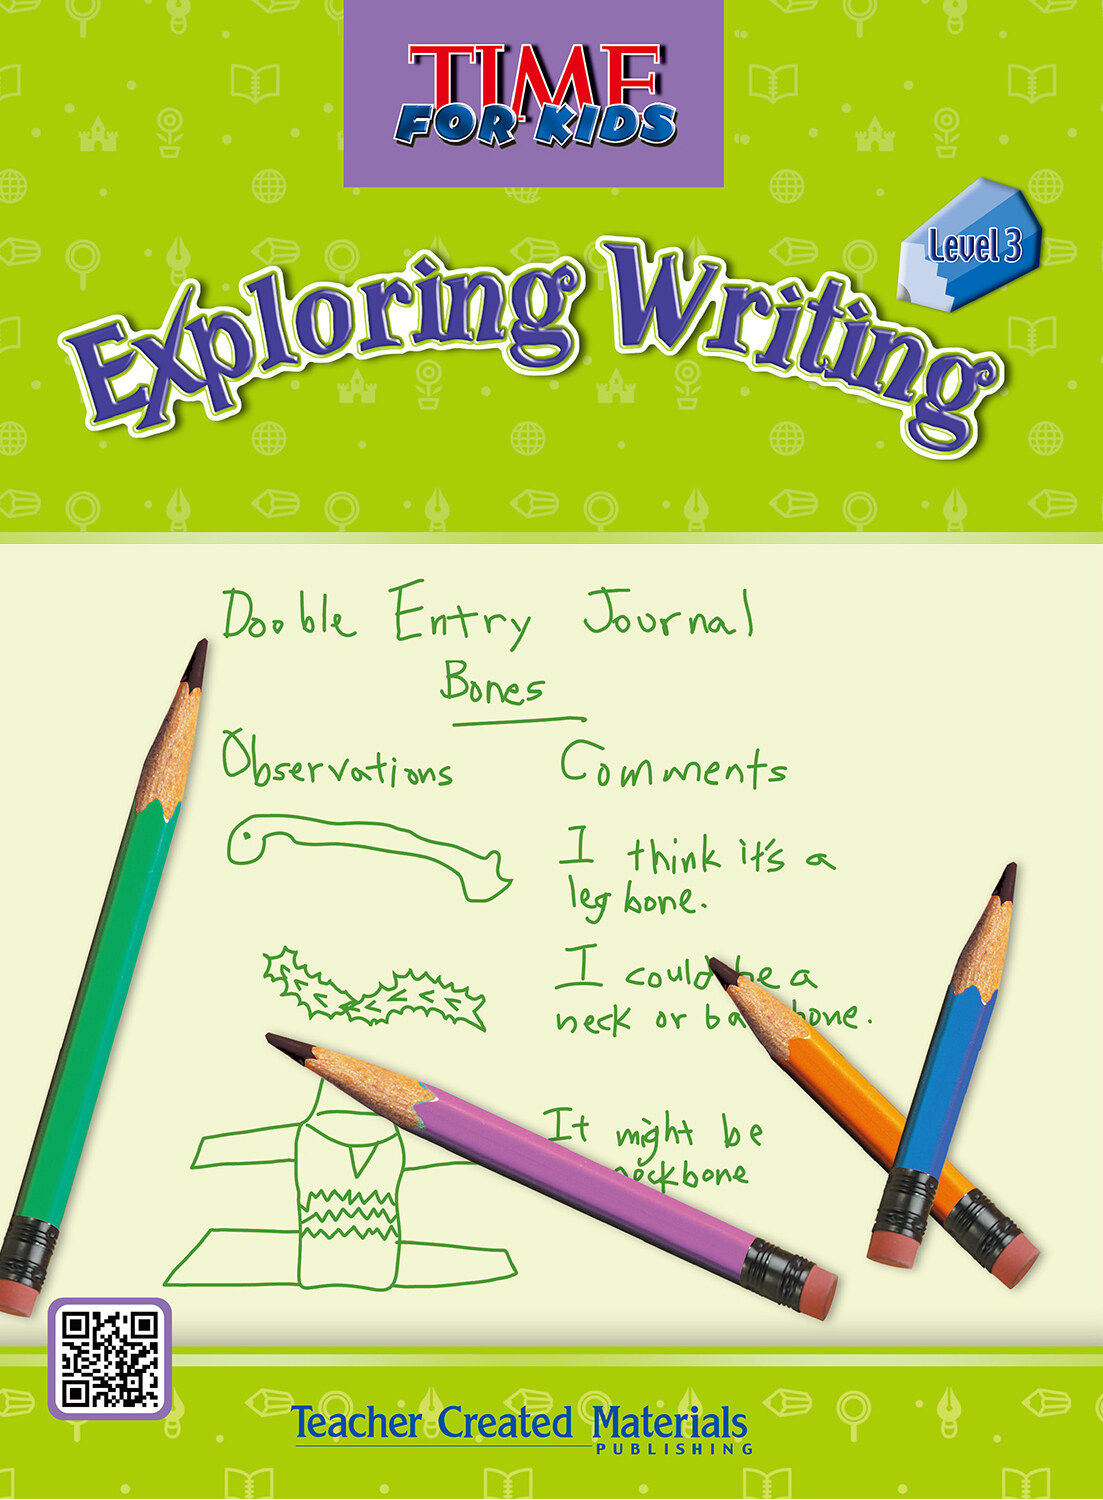 Time for Kids: Exploring Writing 3 with App